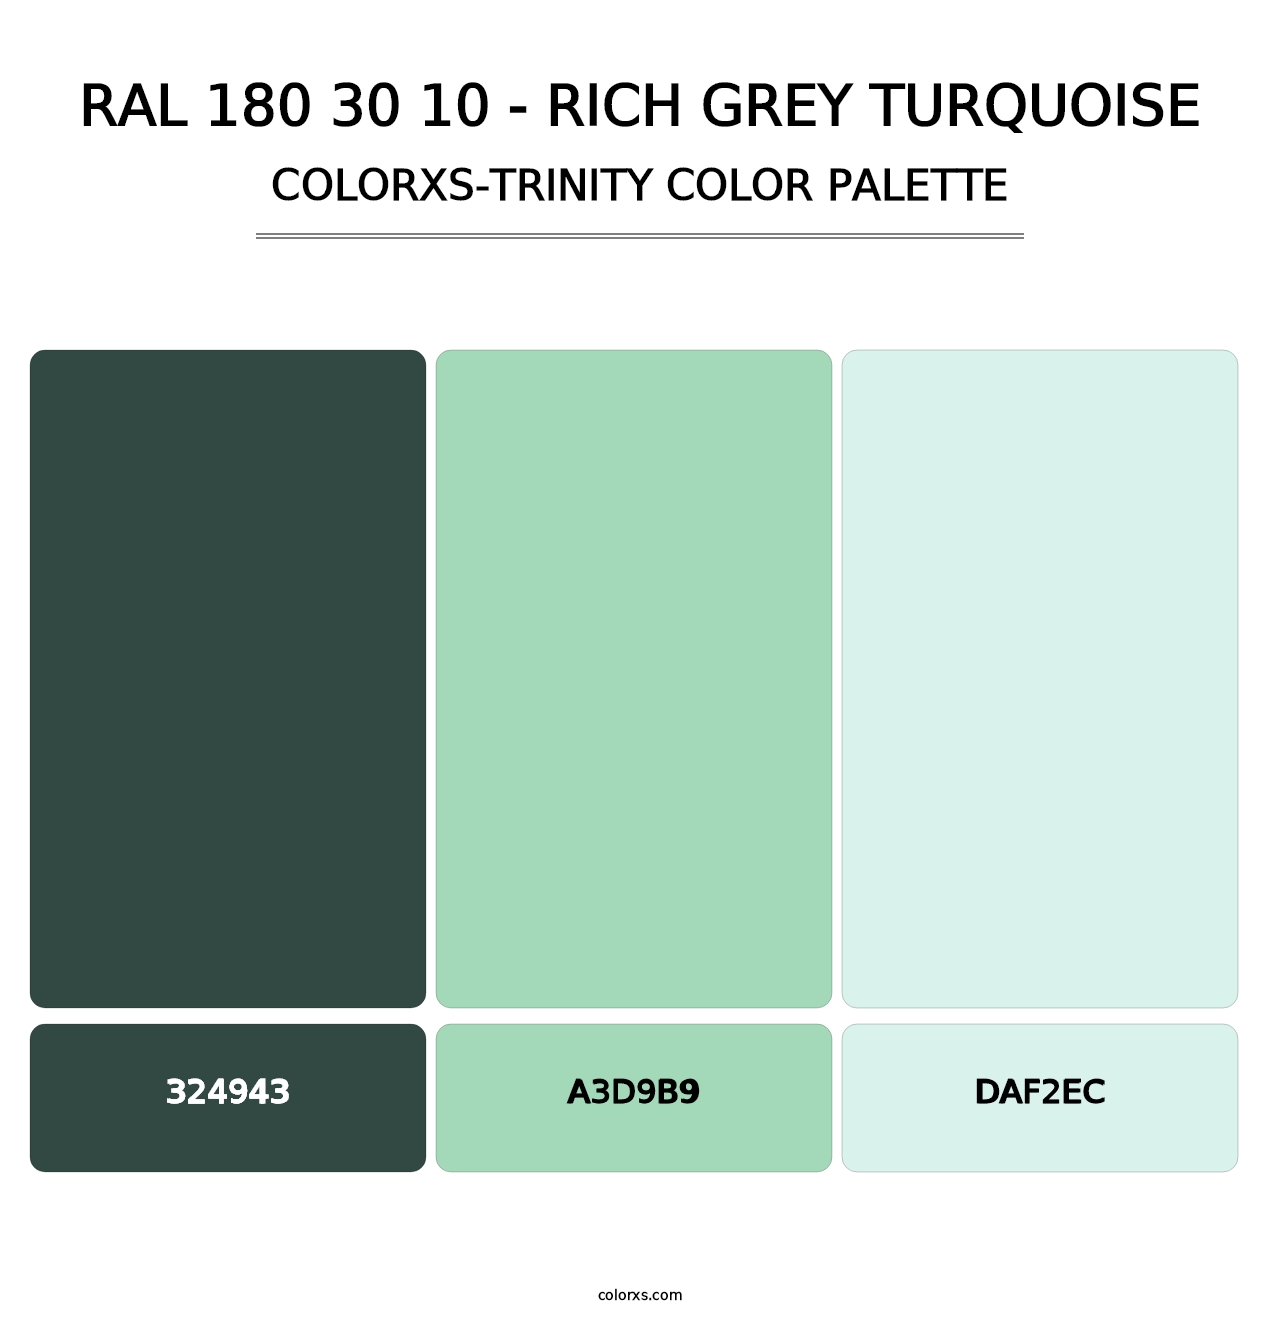 RAL 180 30 10 - Rich Grey Turquoise - Colorxs Trinity Palette